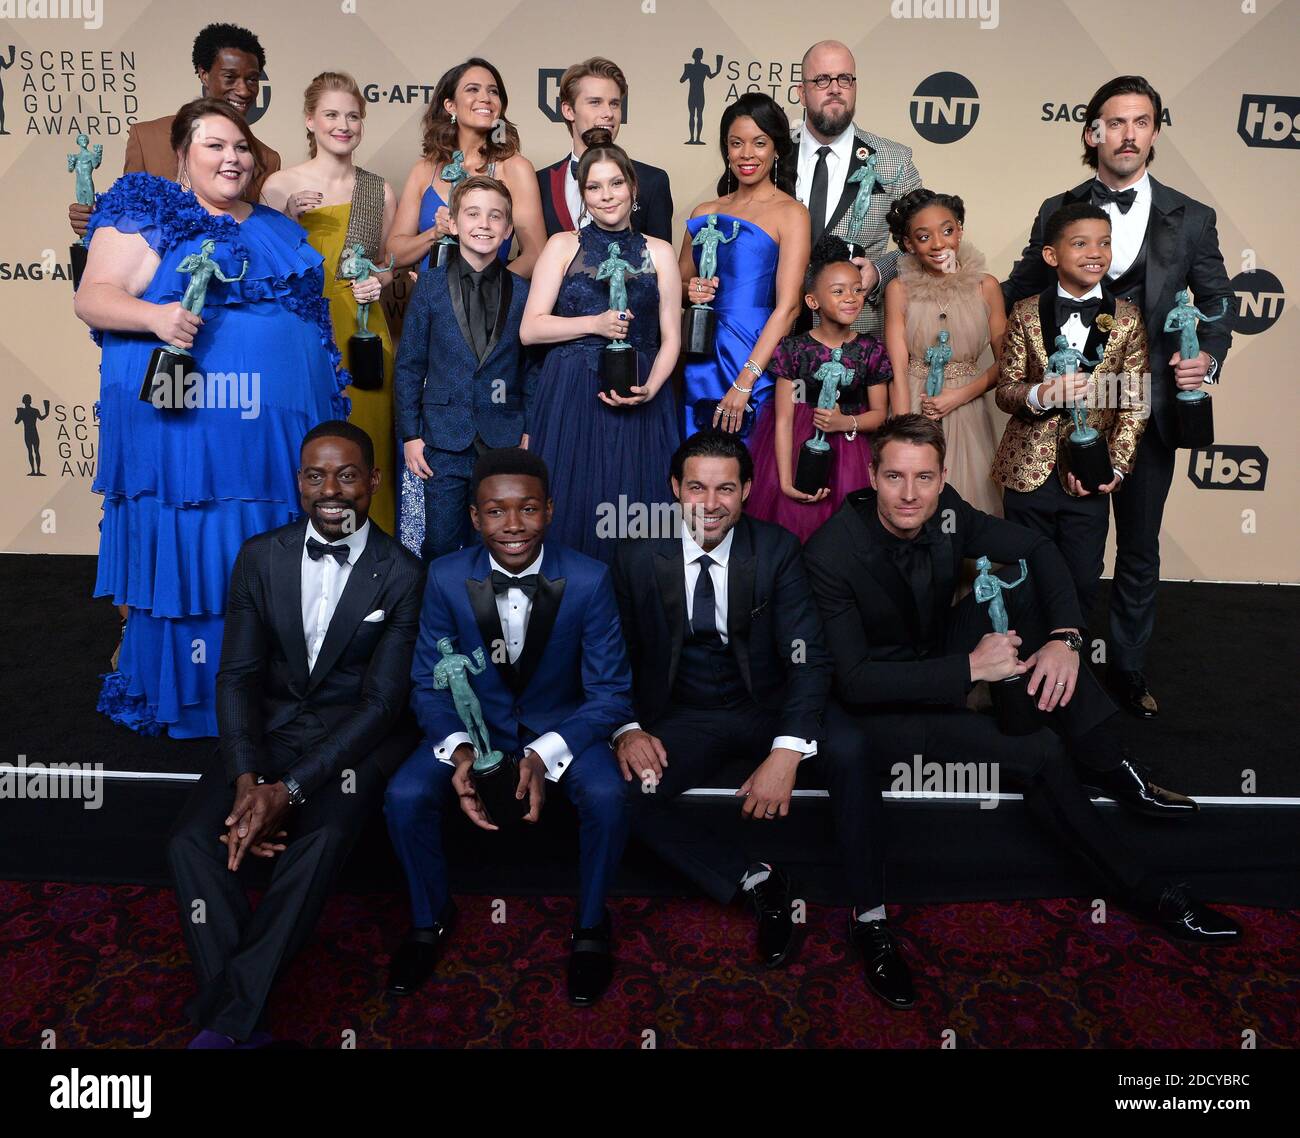 Jermel Nakia, Chrissy Metz, Alexandra Breckenridge, Mandy Moore, Hannah Zeile, Logan Shroyer, Lonnie Chavis, Chris Sullivan, Susan Kelechi Watson, Eris Baker, Milo Ventimiglia, and Faithe Herman, Sterling K. Brown, Niles Fitch, Justin Hartley, and Jon Huertas, winners of Outstanding Performance by an Ensemble in a Drama Series for 'This Is Us', pose in the press room during the 24th Annual Screen Actors Guild Awards at The Shrine Auditorium on January 21, 2018 in Los Angeles, CA, USA. Photo by Lionel Hahn/ABACAPRESS.com Stock Photo